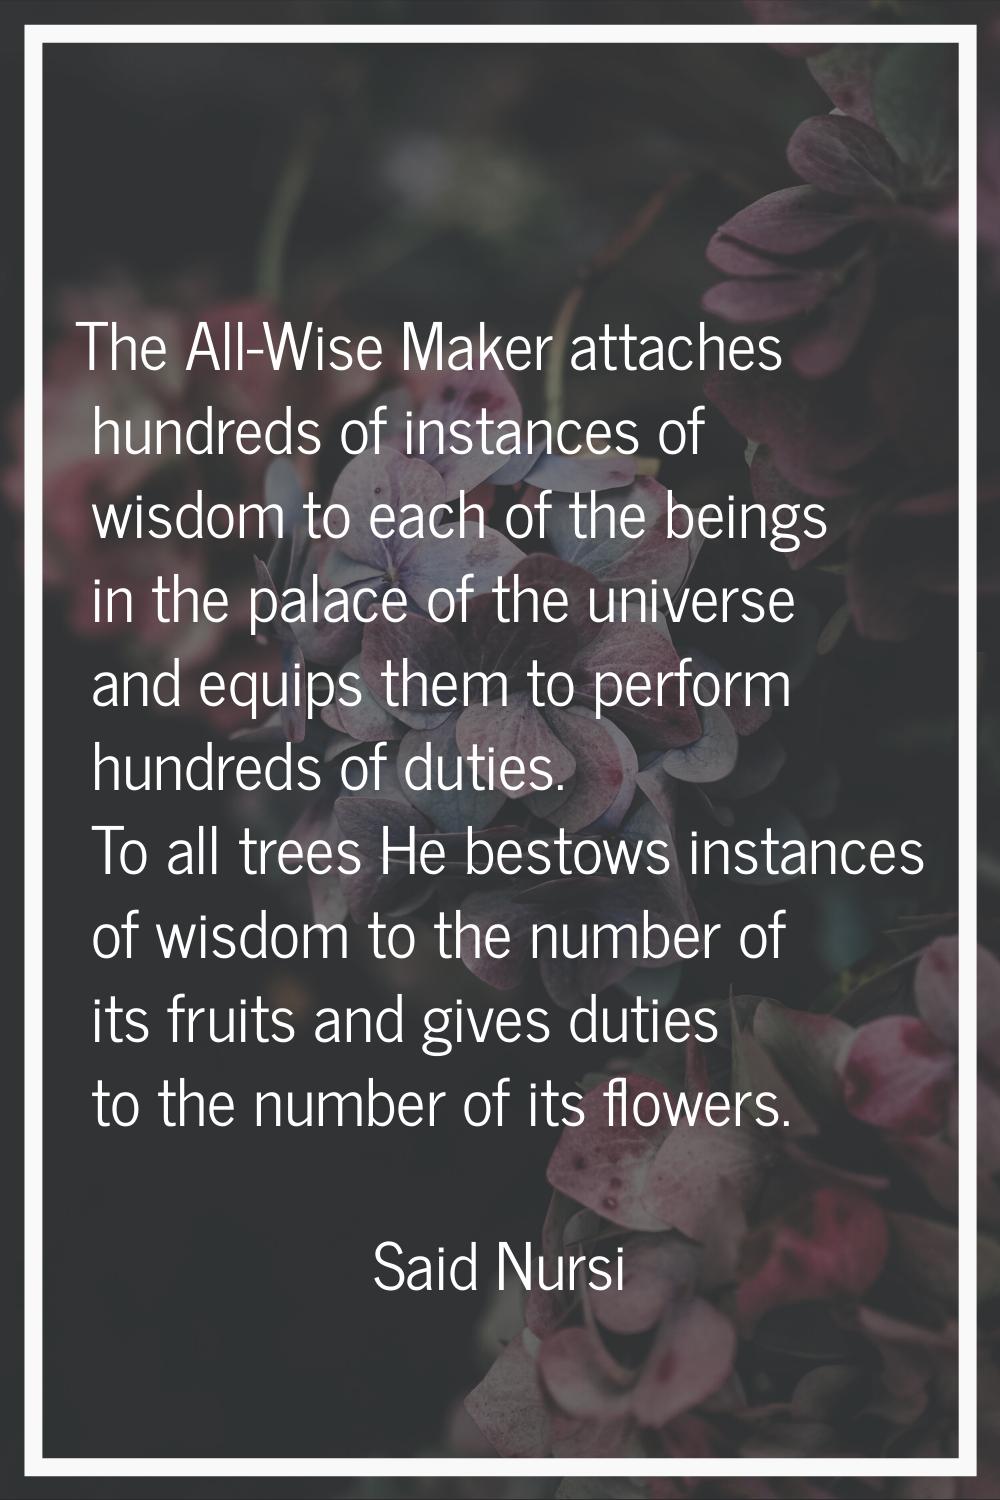 The All-Wise Maker attaches hundreds of instances of wisdom to each of the beings in the palace of 